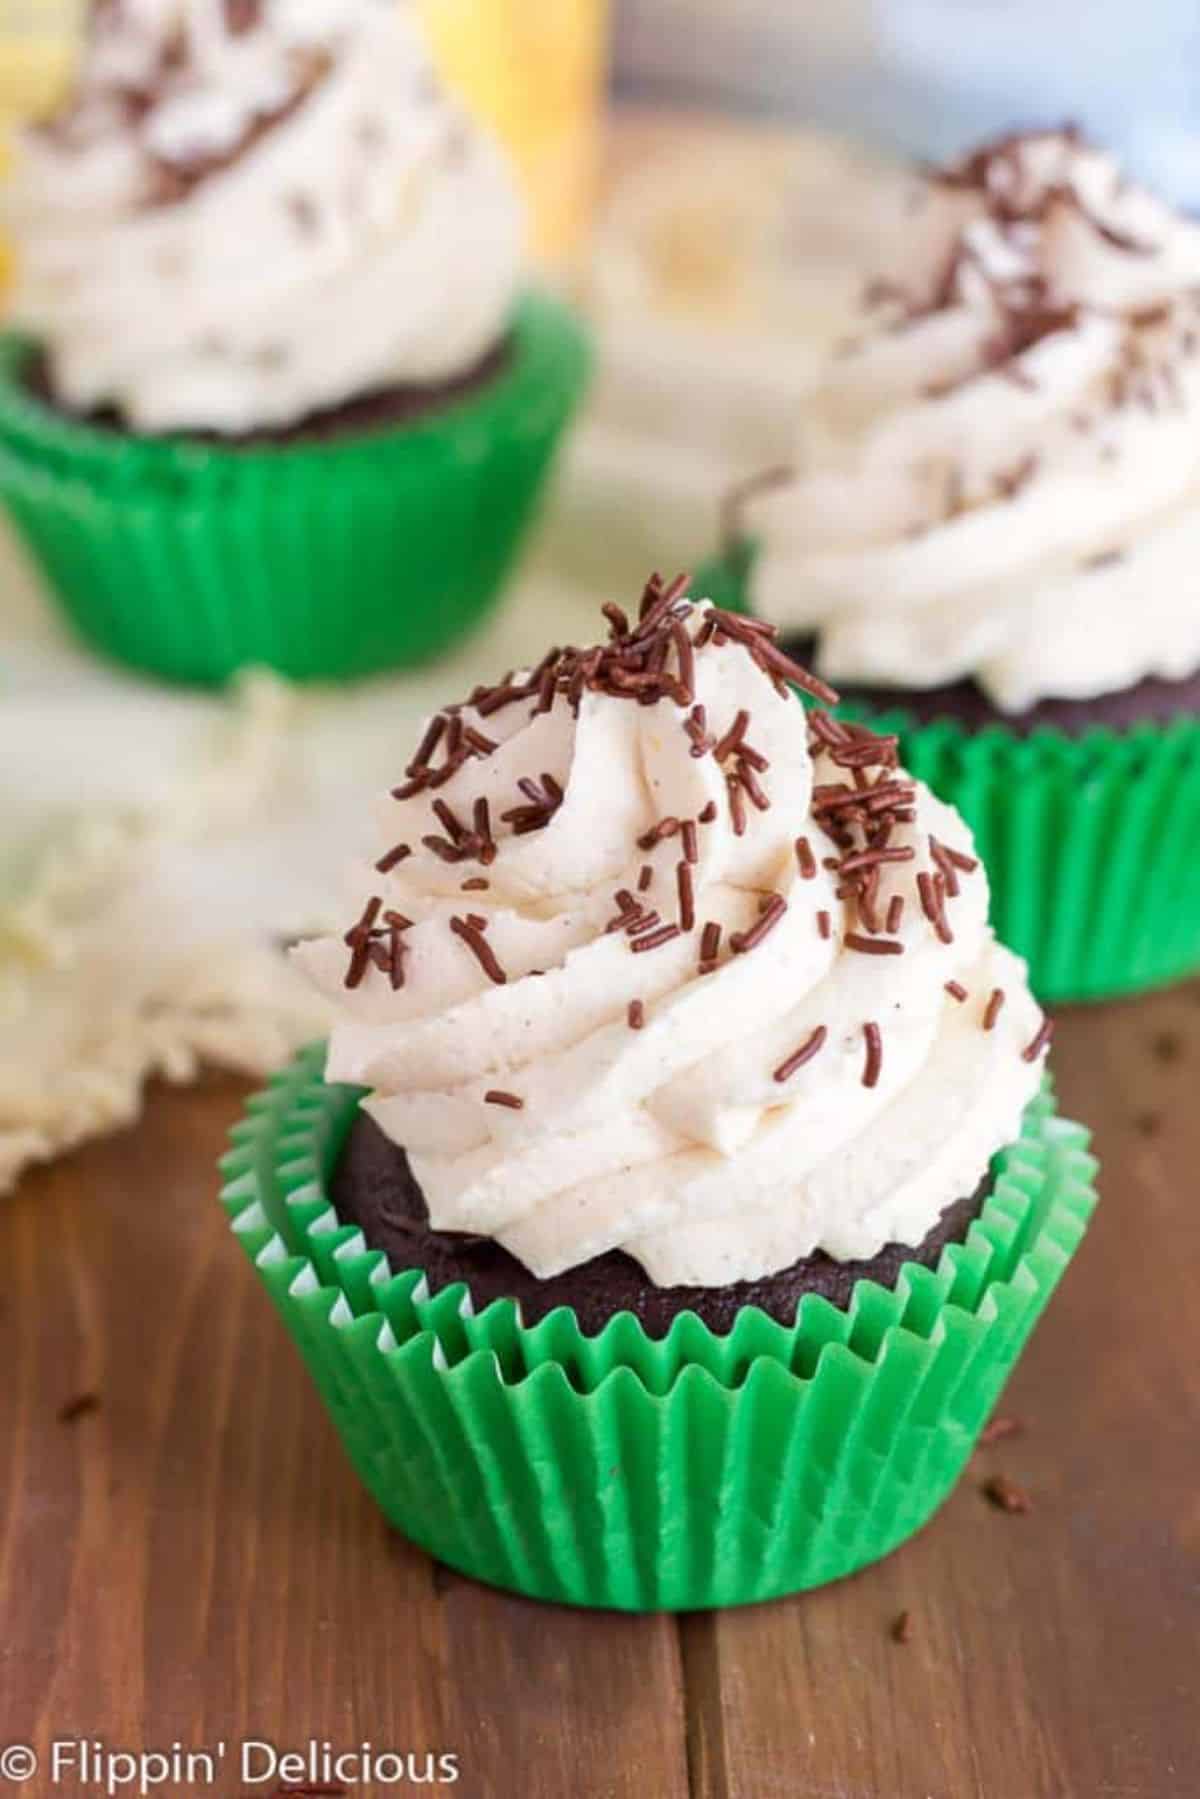 Delicious Irish Cream Cupcakes on a wooden table.